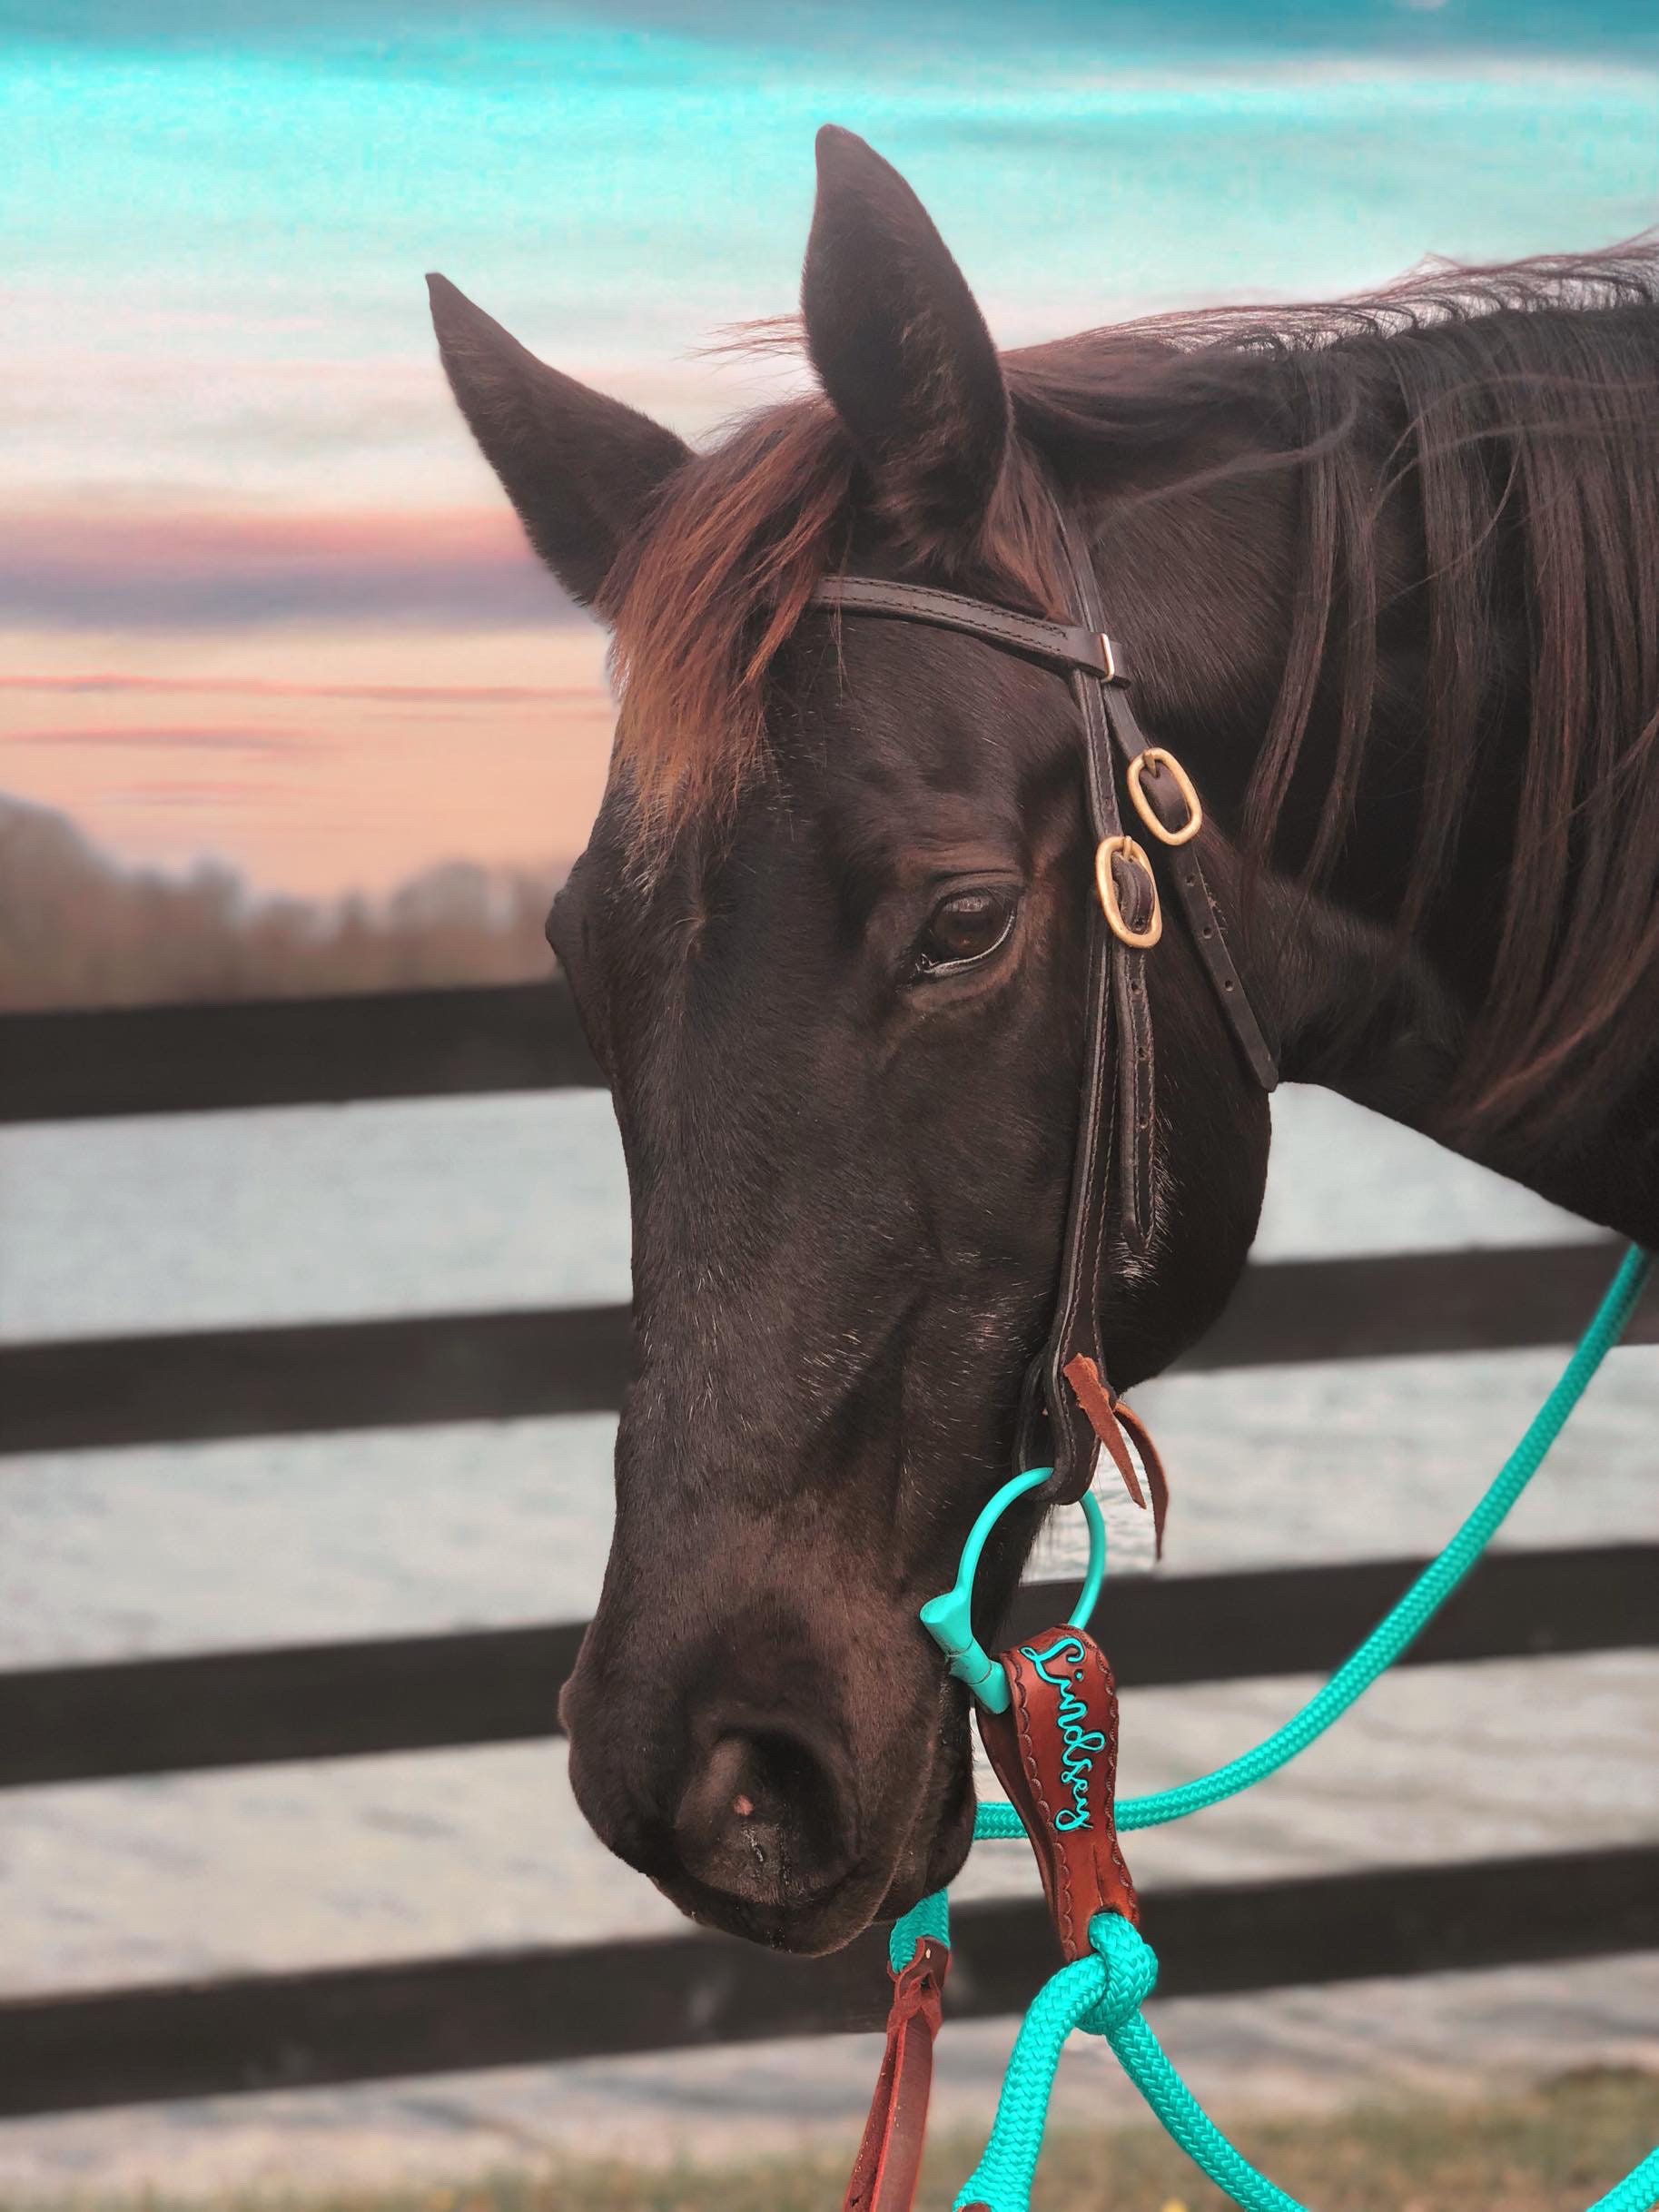 Mecate Reins & Slobber Straps - Custom Made to Order with Personalized Name Options or Brands